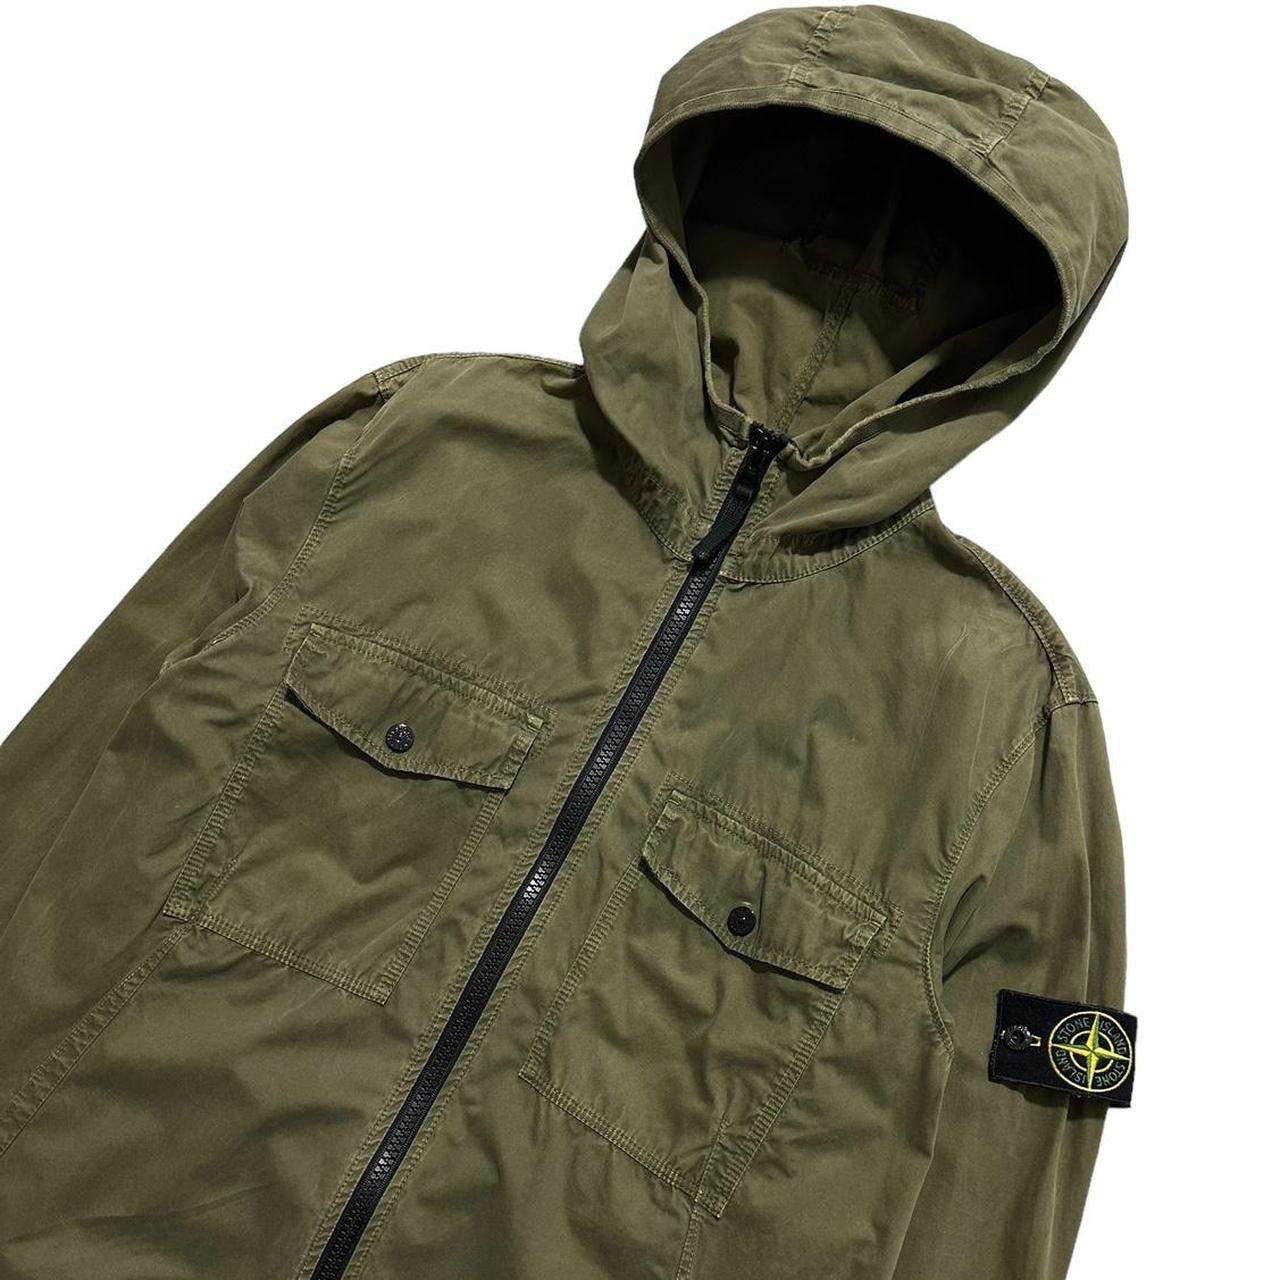 Stone Island Double Pocket Canvas Jacket - Known Source